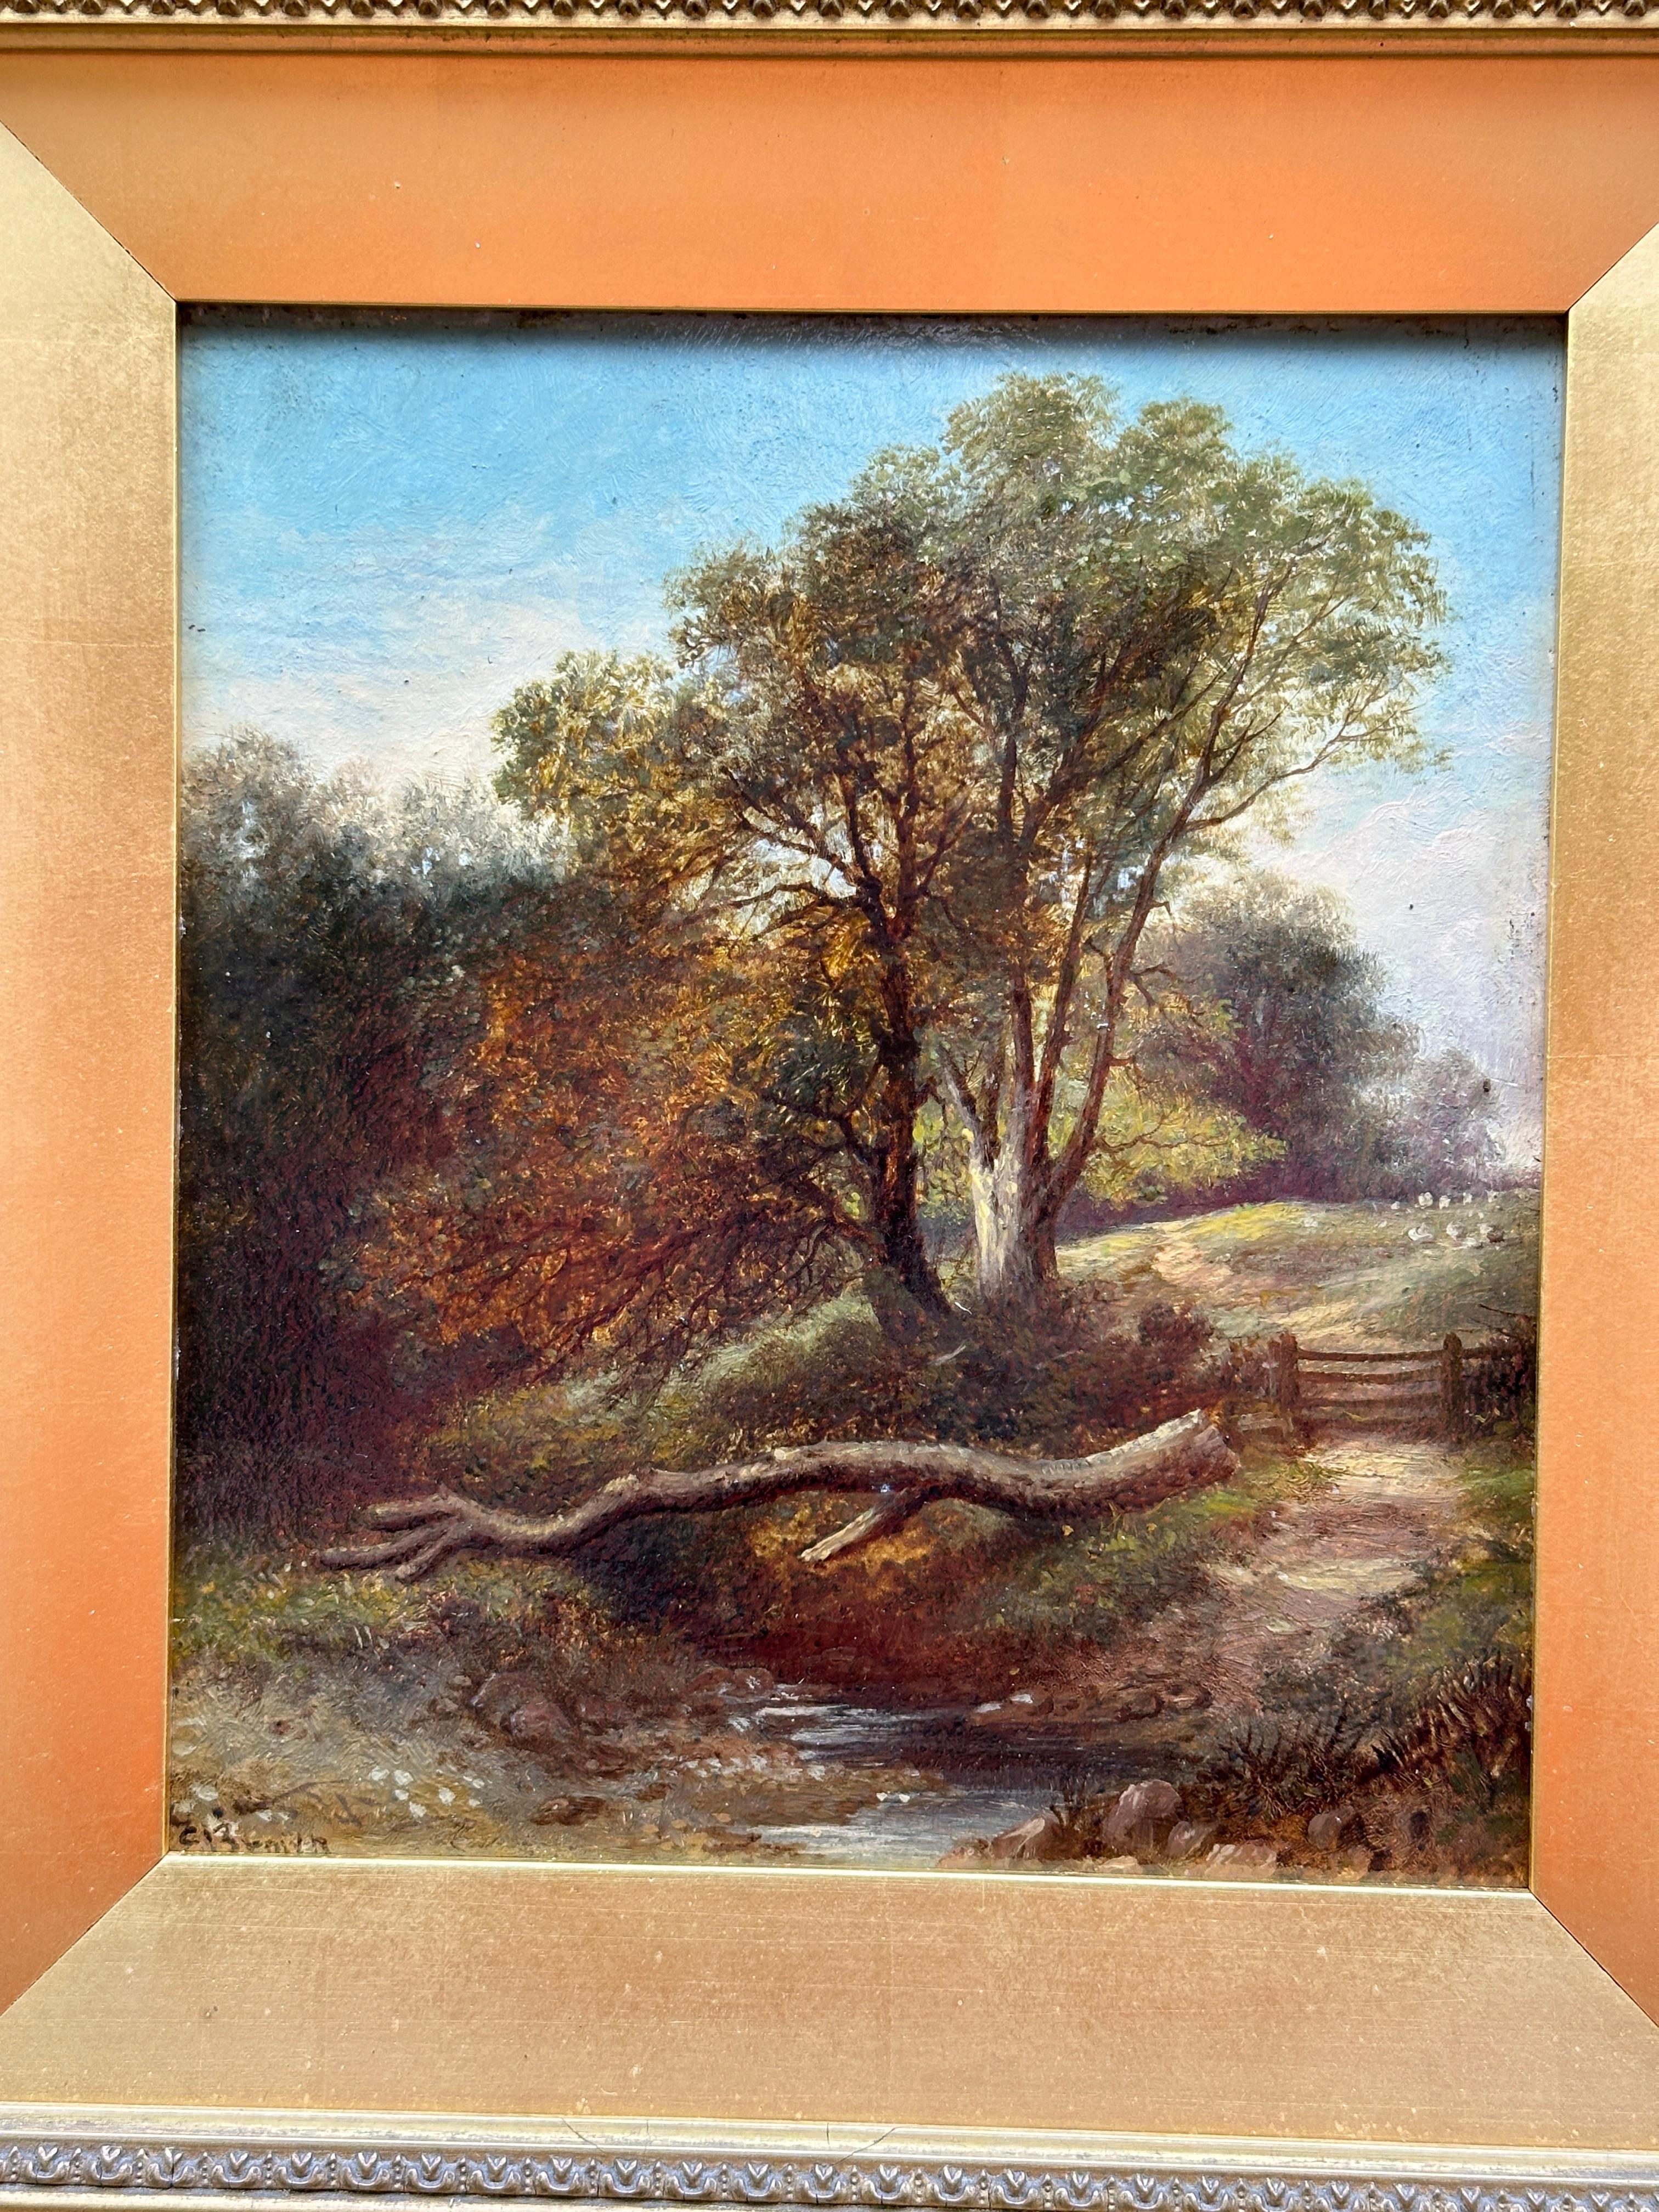 19th century English landscape with Oak trees, a stream and sheep on a pathway - Painting by C. Brown